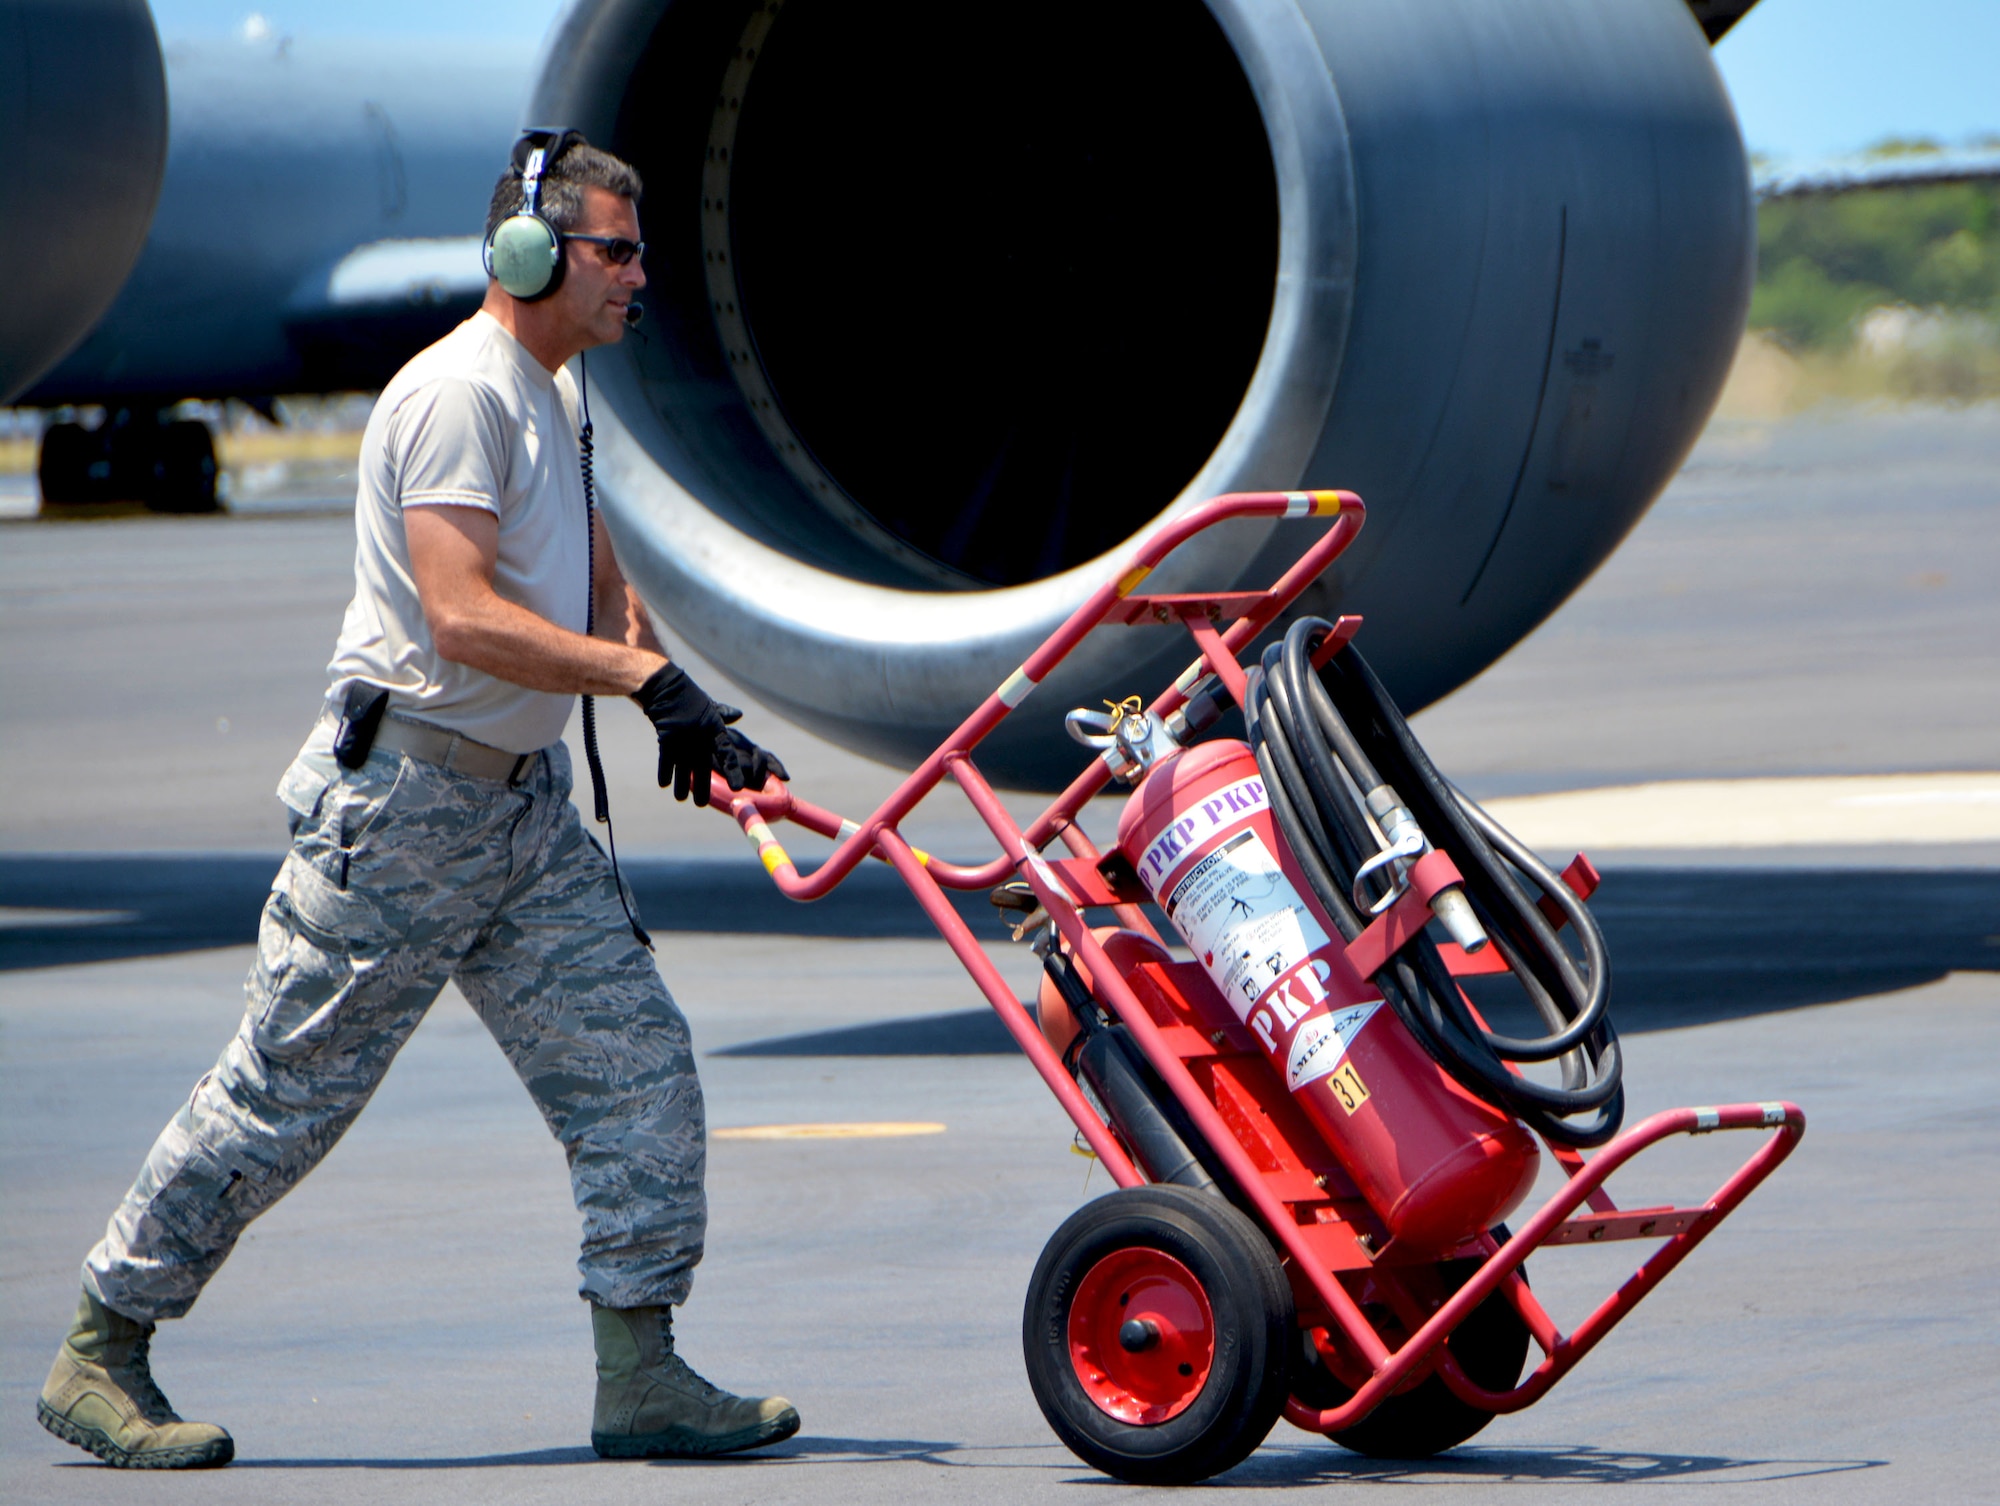 Tech. Sgt. Timothy Hardy, 507th Aircraft Maintenance Squadron crew chief from Tinker Air Force Base, Oklahoma, rolls a fire extinguisher into place near a 97th Air Mobility Wing KC-135 Stratotanker from Altus Air Force Base, Oklahoma, during the Rim of the Pacific (RIMPAC) exercise July 16. Twenty-five nations, 46 ships, five submarines, and about 200 aircraft and 25,000 personnel are participating in RIMPAC from June 27 to Aug. 2 in and around the Hawaiian Islands and Southern California. The world’s largest international maritime exercise, RIMPAC provides a unique training opportunity while fostering and sustaining cooperative relationships among participants critical to ensuring the safety of sea lanes and security of the world’s oceans. RIMPAC 2018 is the 26th exercise in the series that began in 1971. (U.S. Air Force photo by Tech. Sgt. Samantha Mathison)